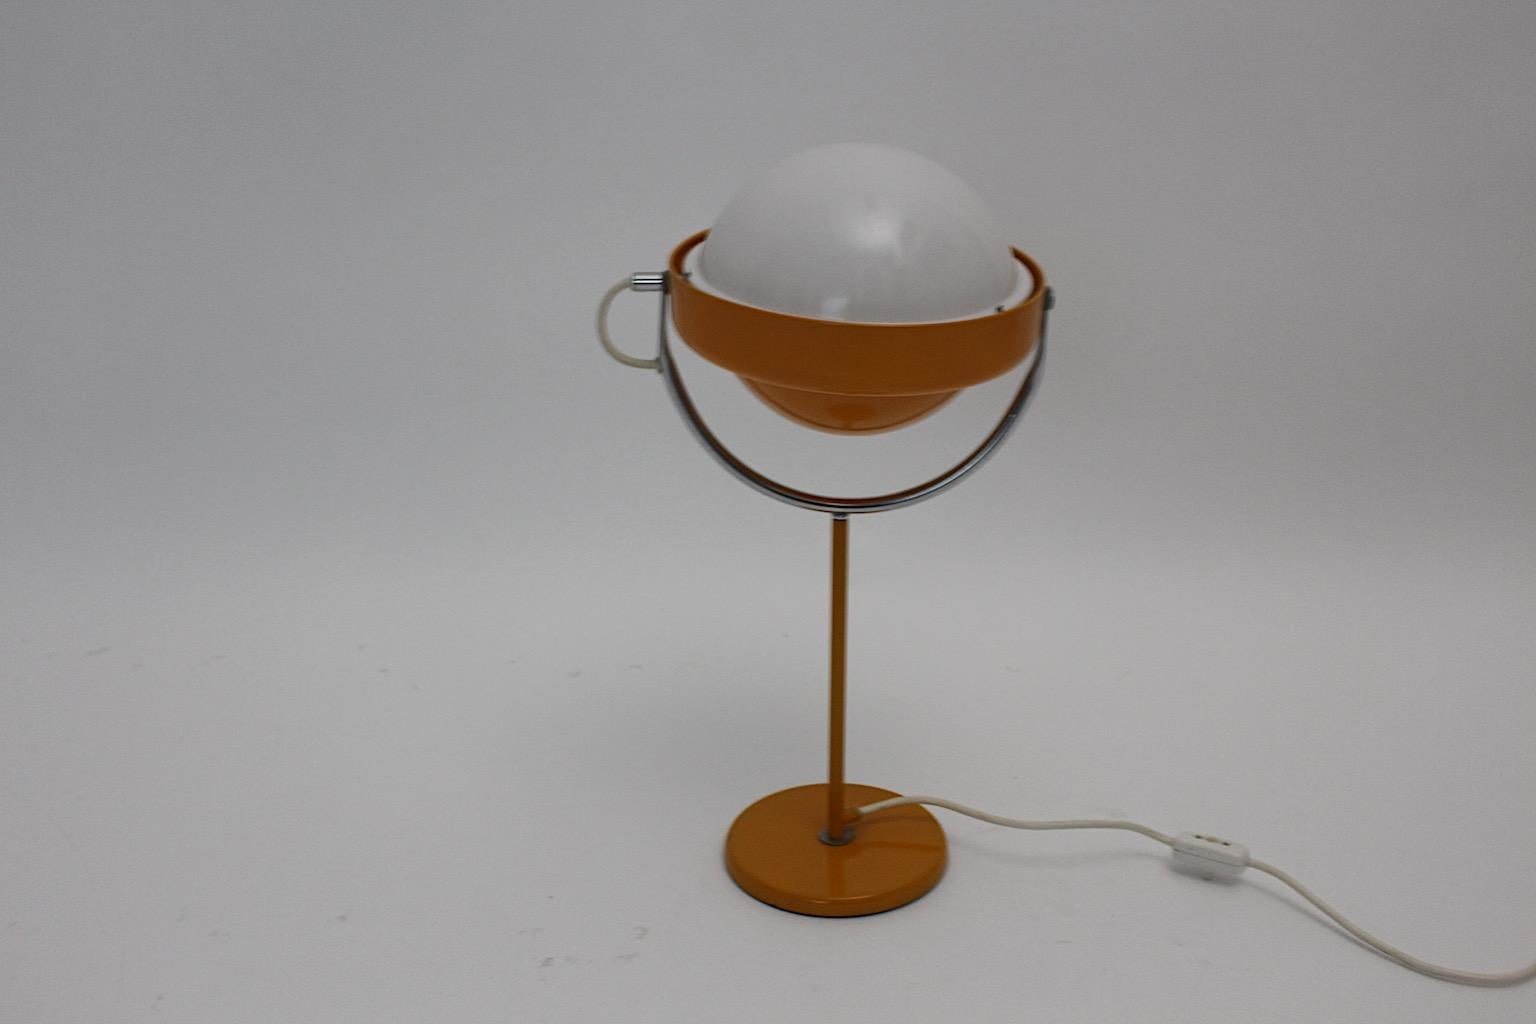 Space Age Vintage Yellow or Orange Table Lamp Uno Dahlen, 1960s, Sweden For Sale 1